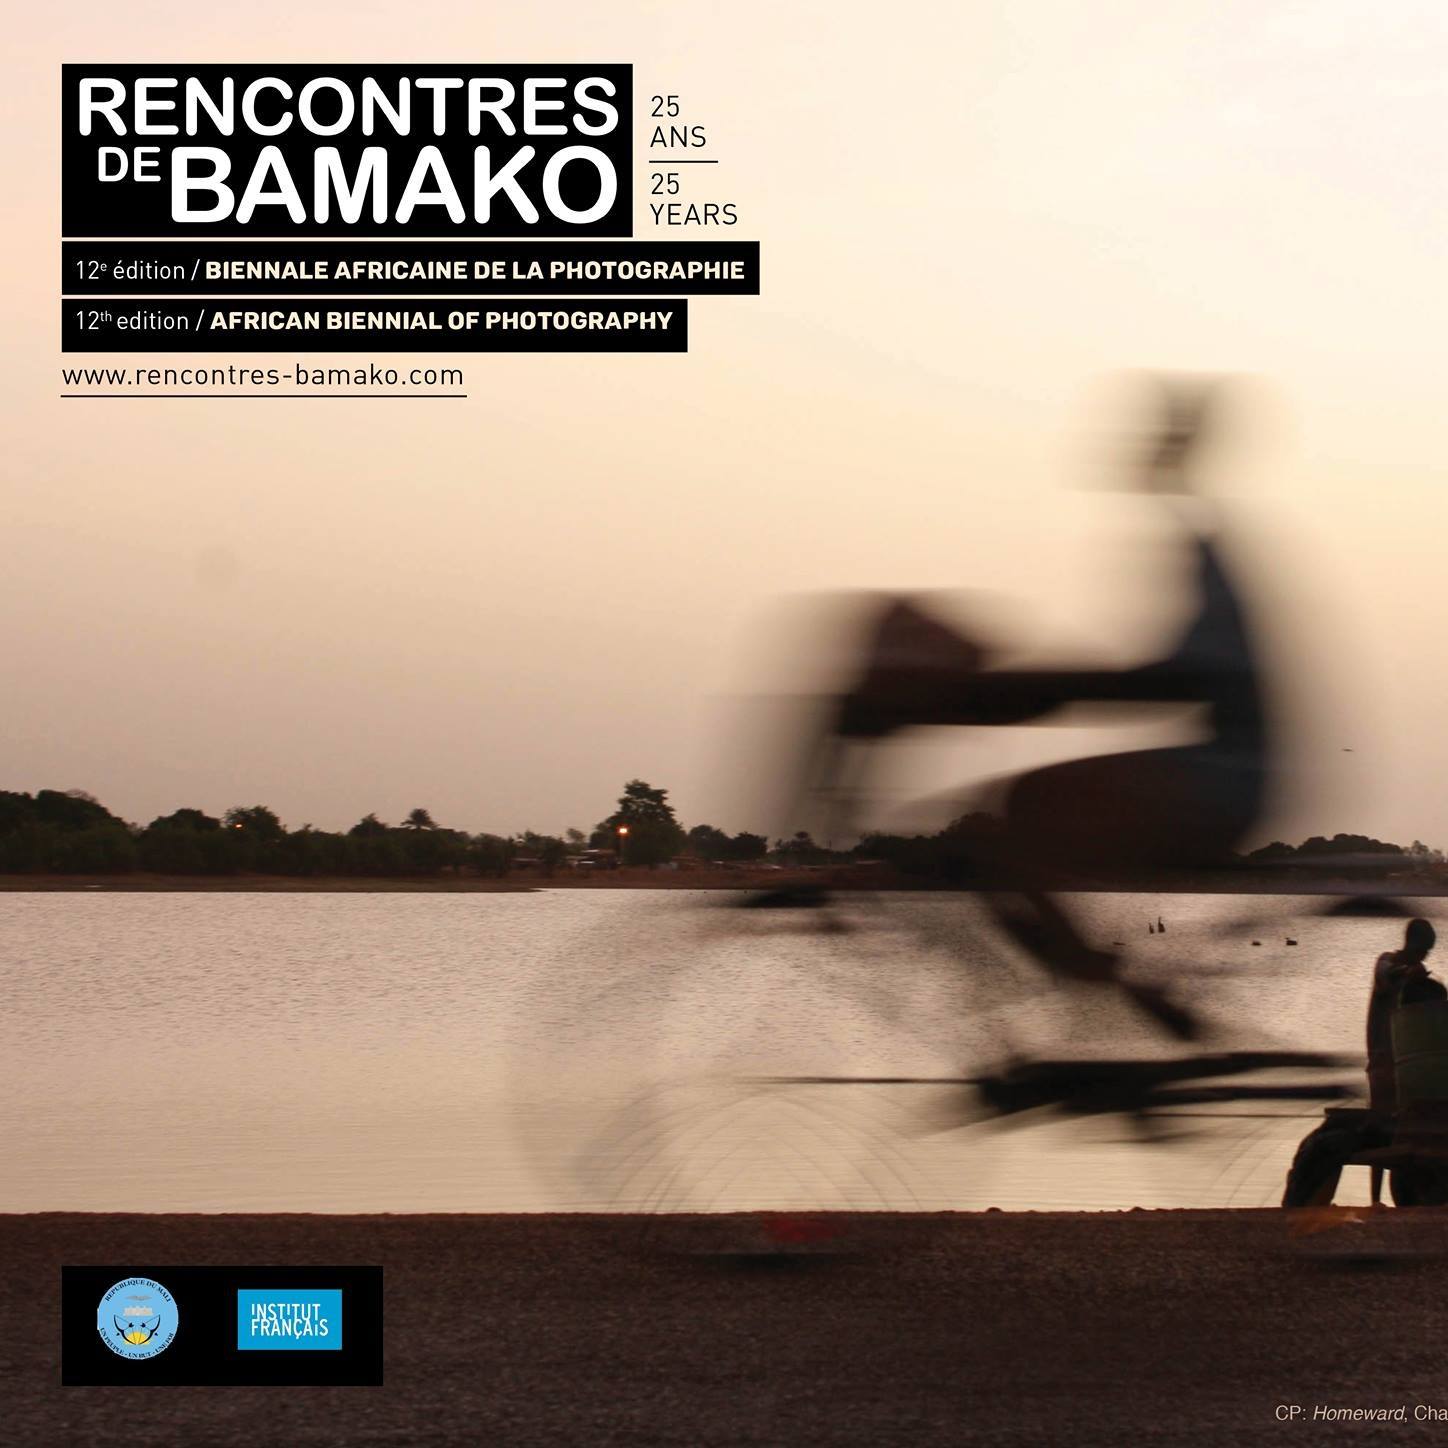 Bamako Encounters – African Biennale of Photography